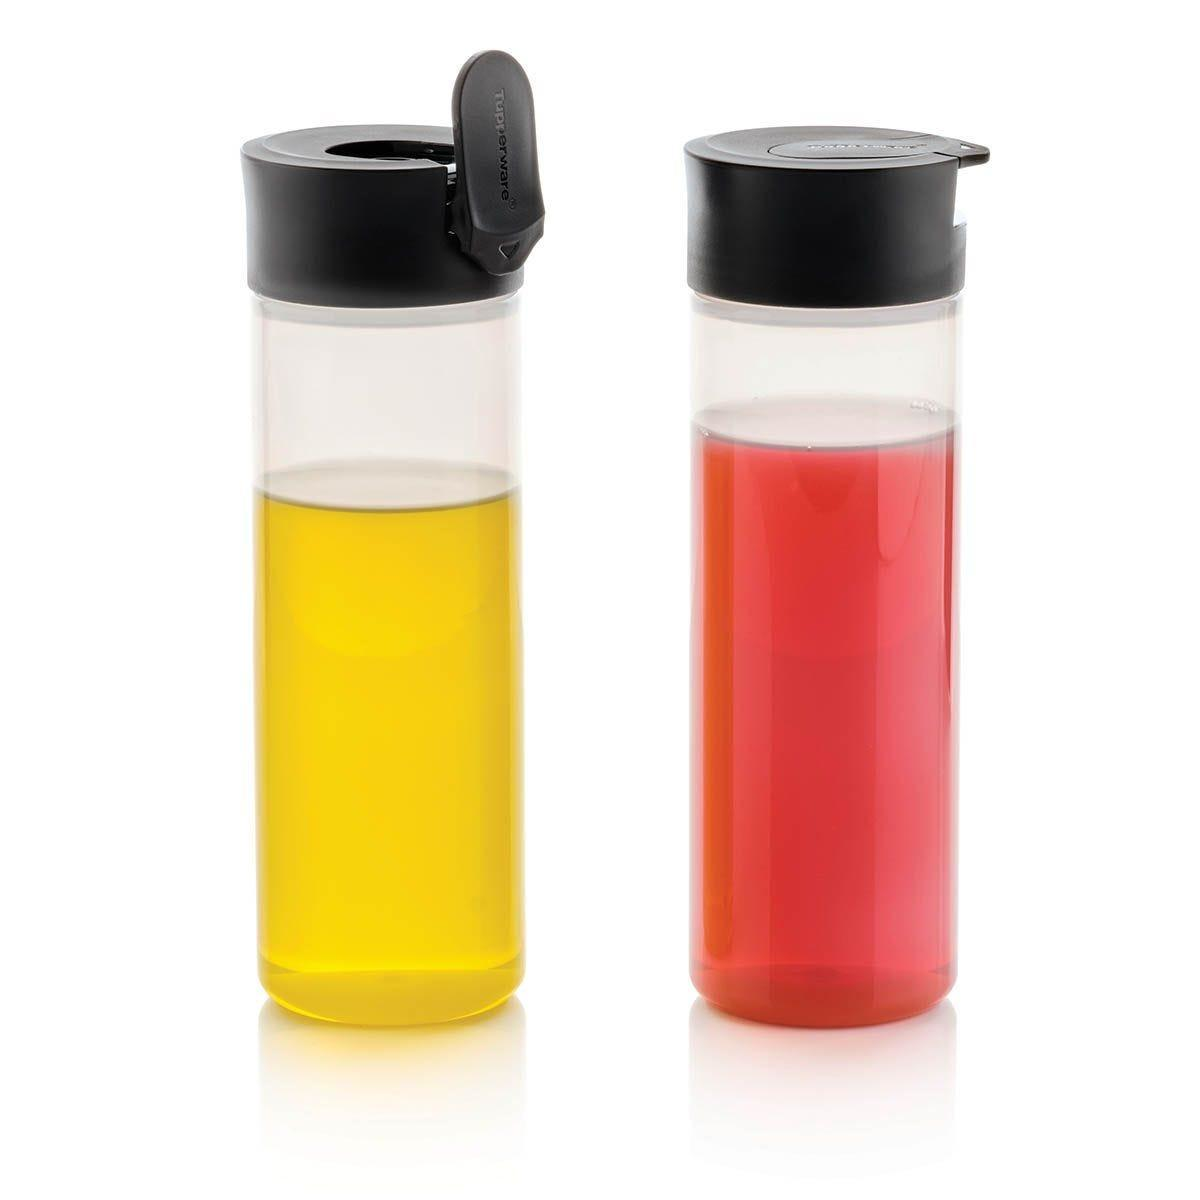 Squeeze It® Bottles with olive oil and red vinegar